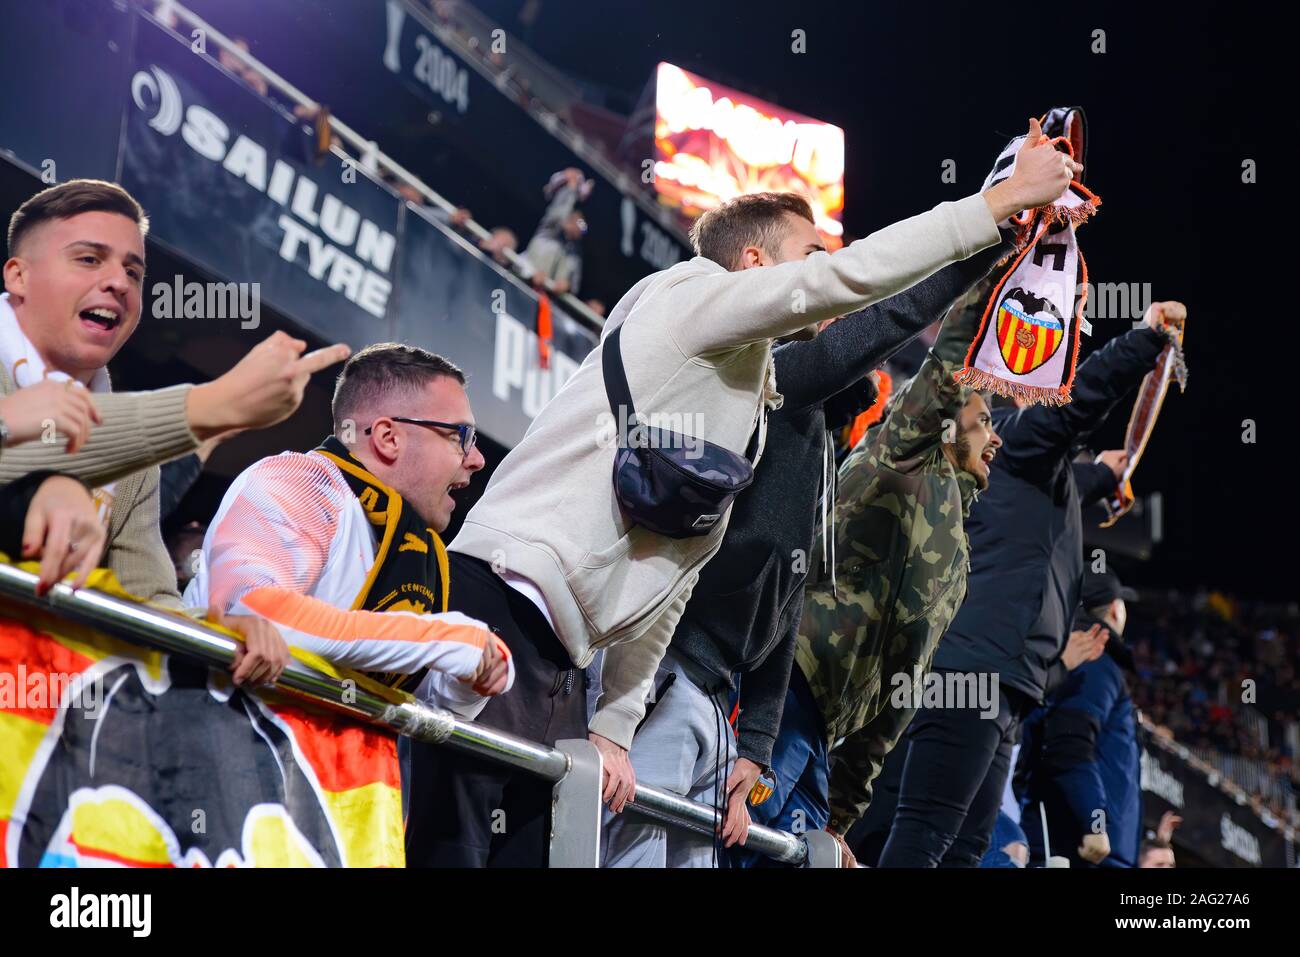 VALENCIA, SPAIN - DEC 15: Supporters at the La Liga match between Valencia CF and Real Madrid CF at the Mestalla Stadium on December 15, 2019 in Valen Stock Photo